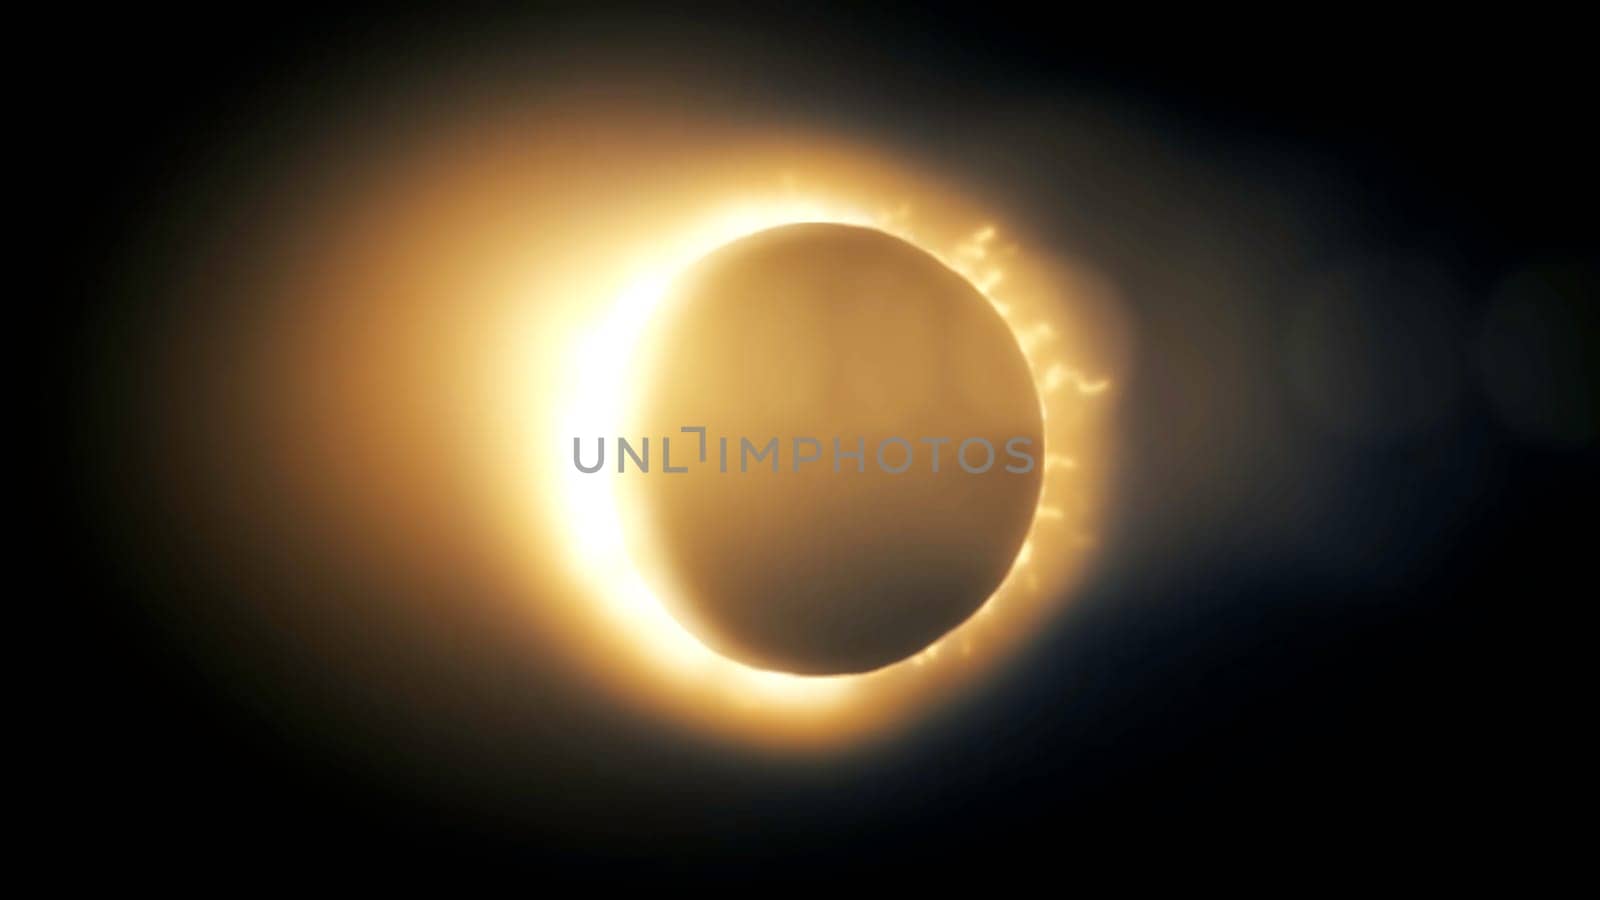 Abstract solar eclipse caused by a Lunar event with ring of fire. Animated abstract view of a total solar eclipse